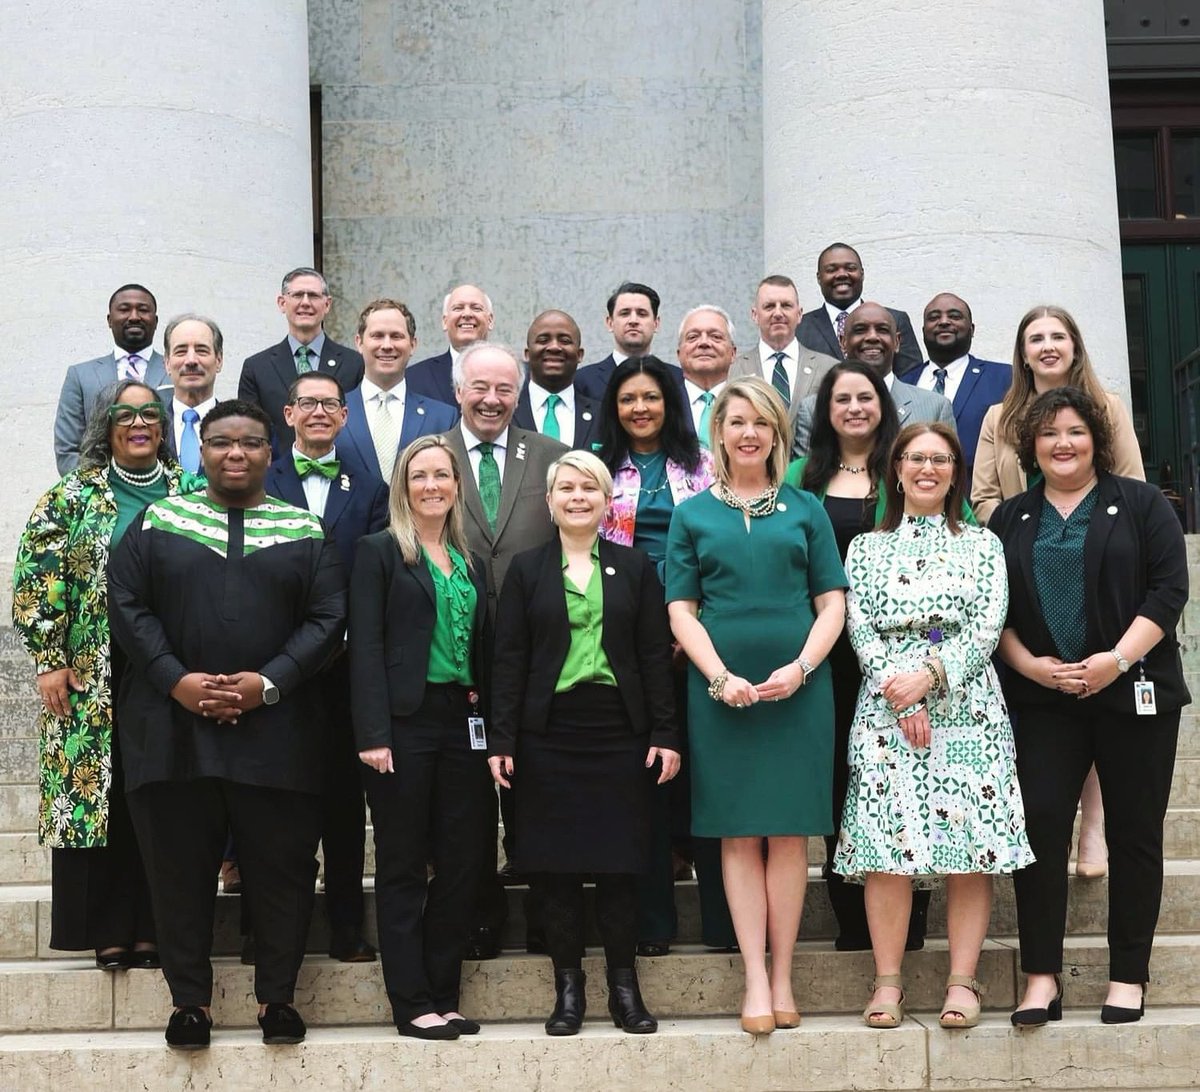 On Wednesday my colleagues, the @OHHouseDems and I wore green 💚 to the State of the State address in honor of our courageous former colleague Brigid Kelly. May we never forget her superb and dedicated legacy to public service.